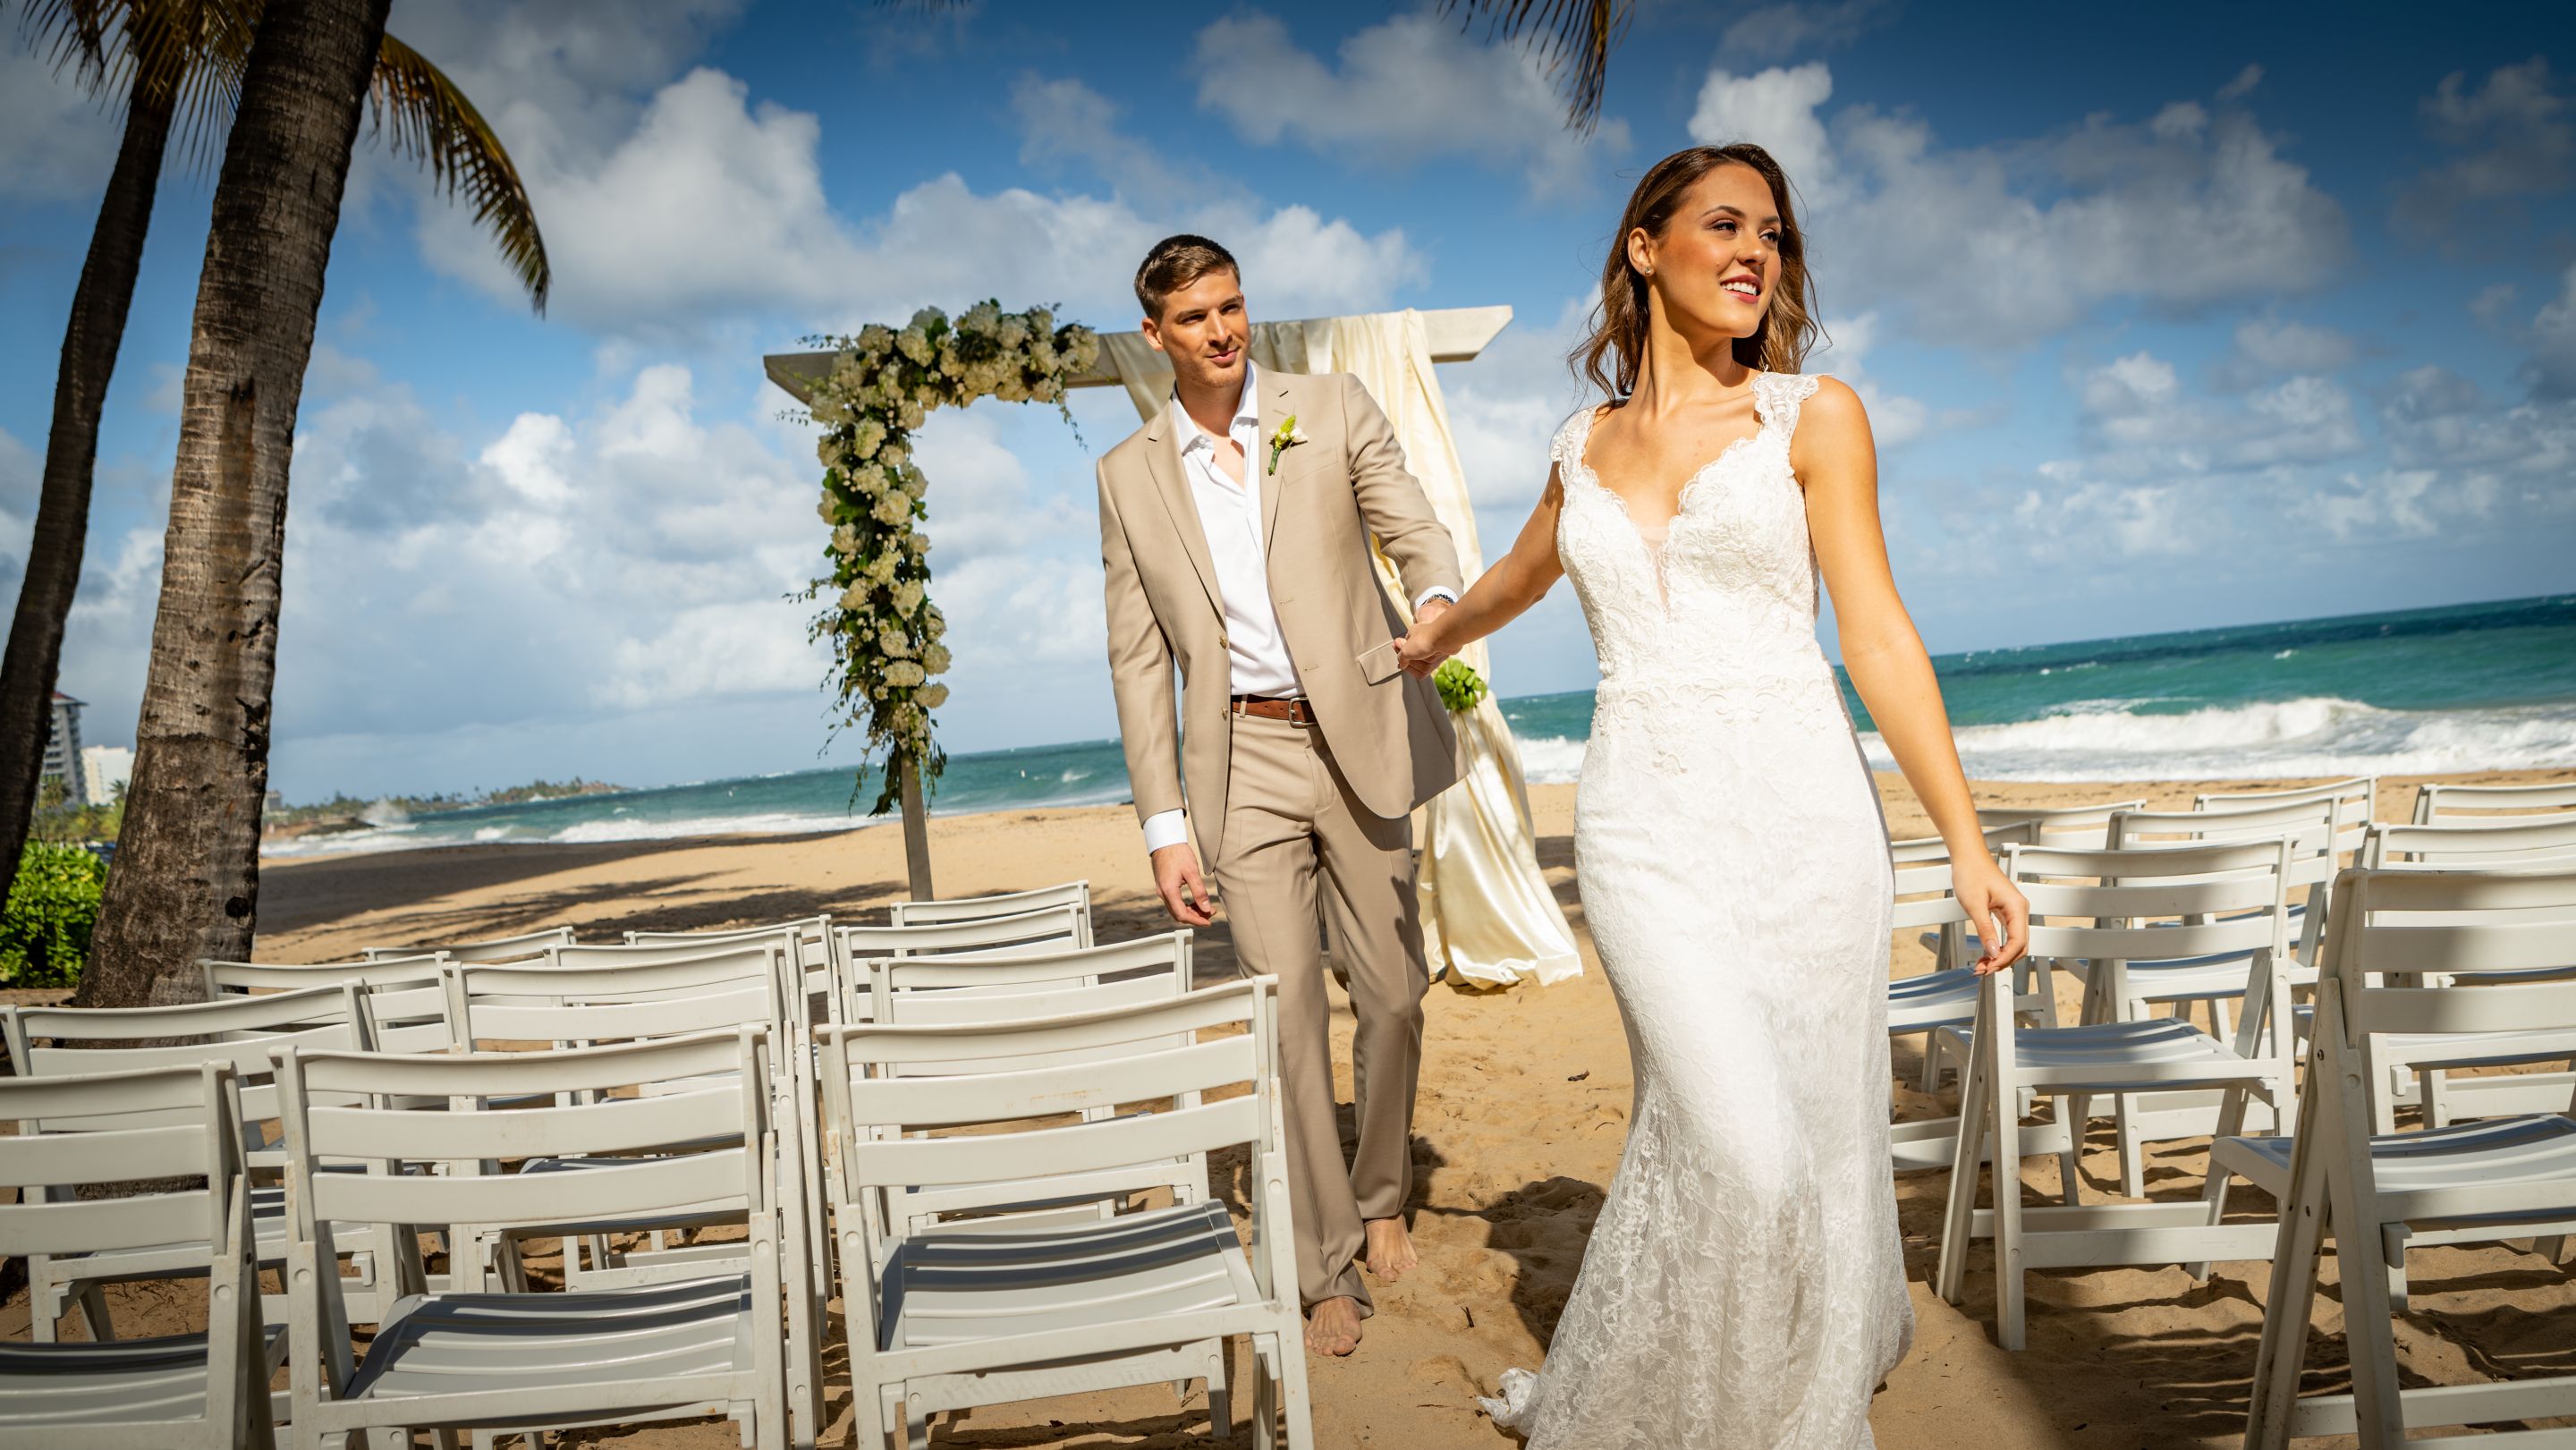 Bride and groom holding hands on a beach and walking down an aisle.